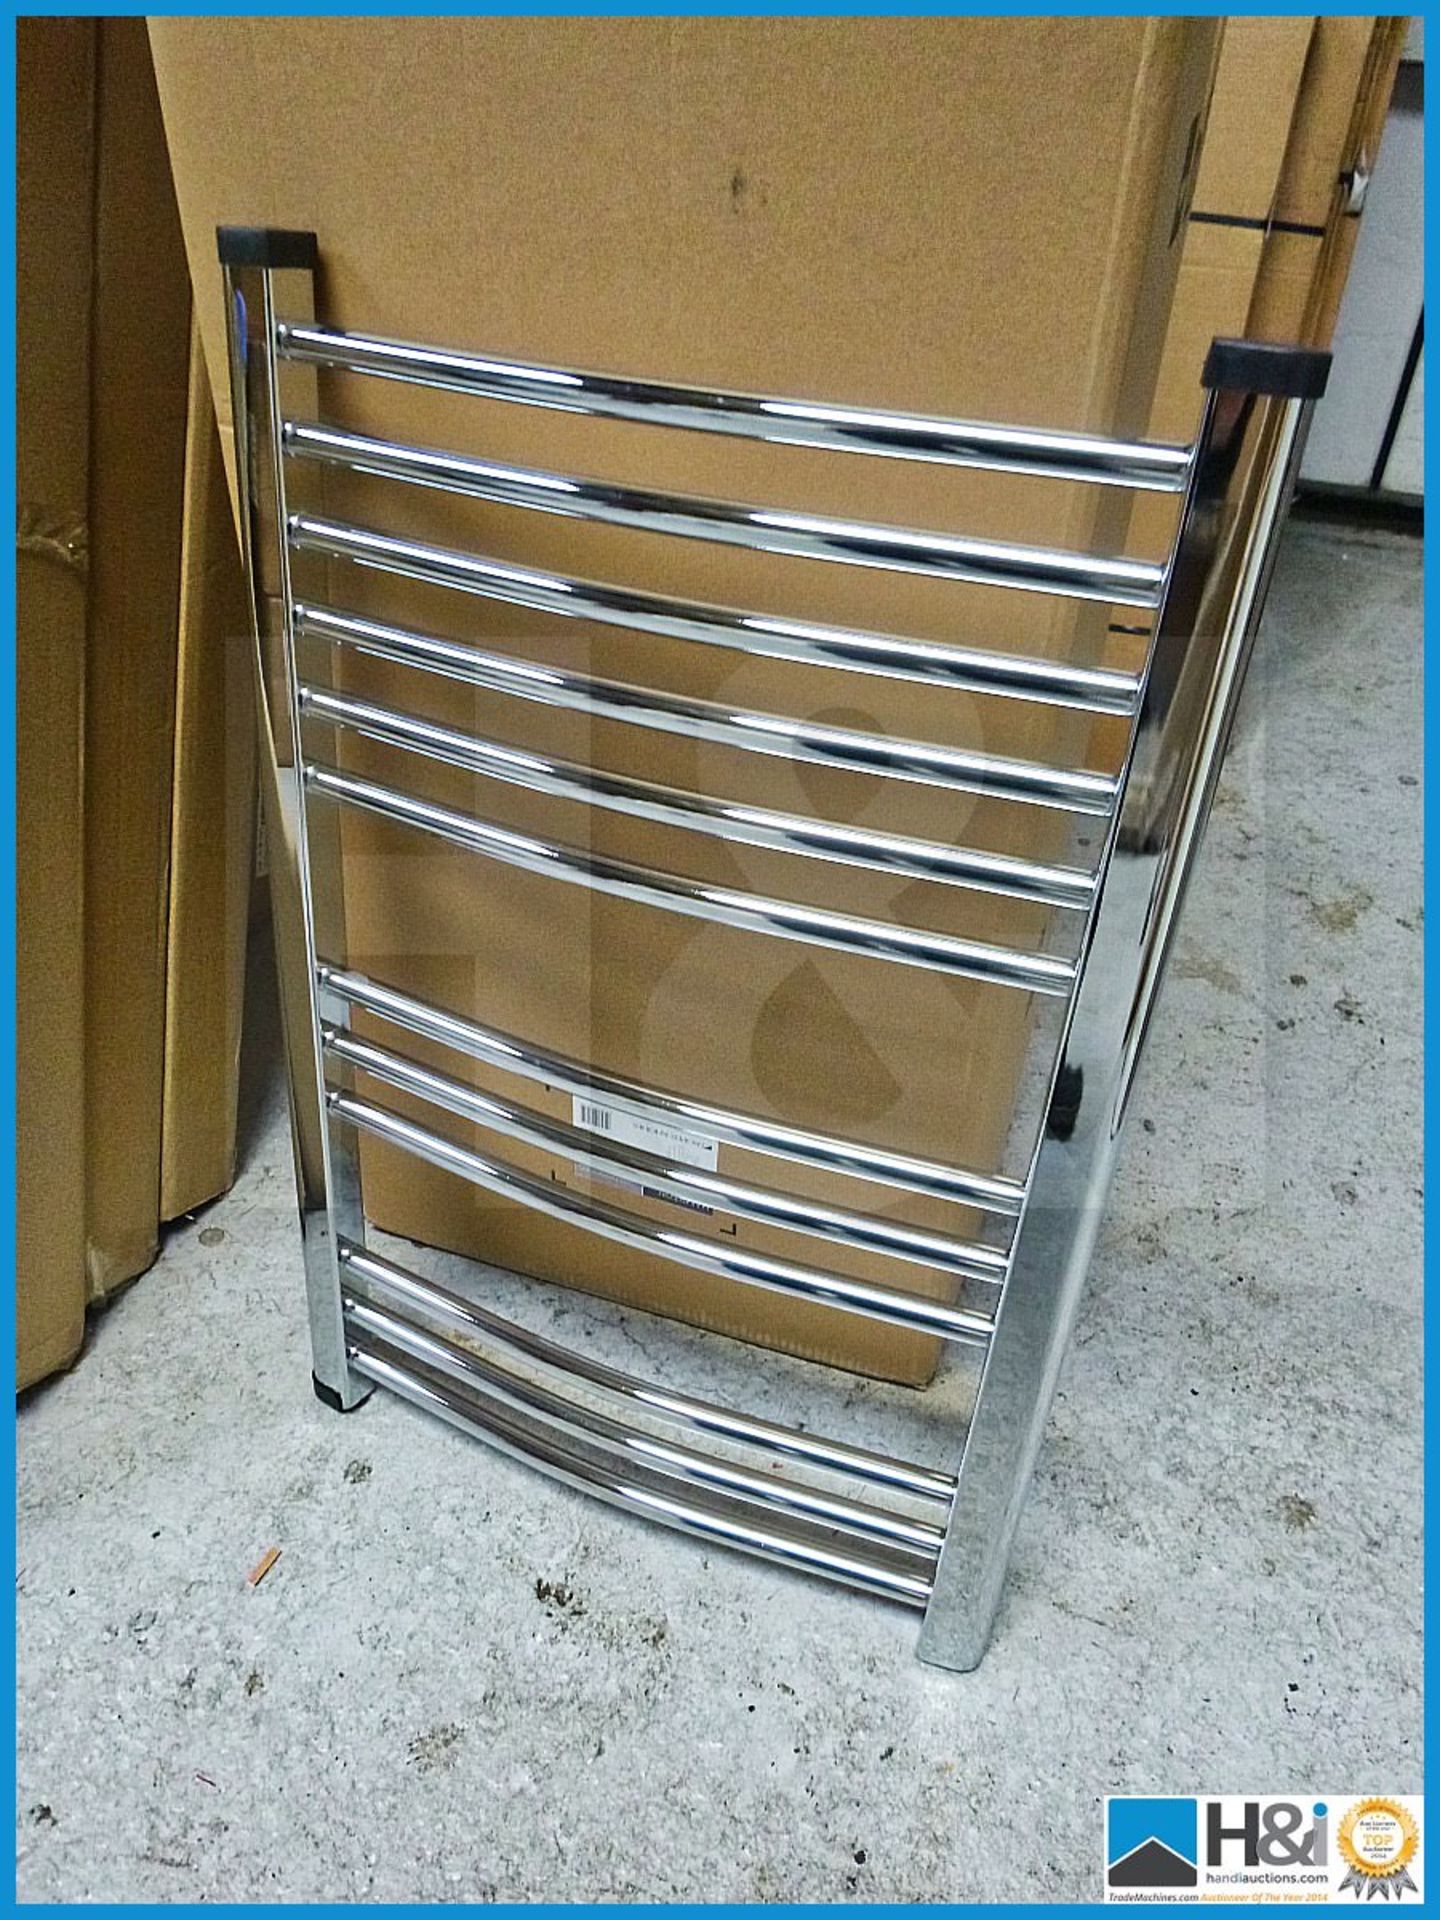 Chrome towel radiator 750X500mm Complete with fittings RRP 129 GBP